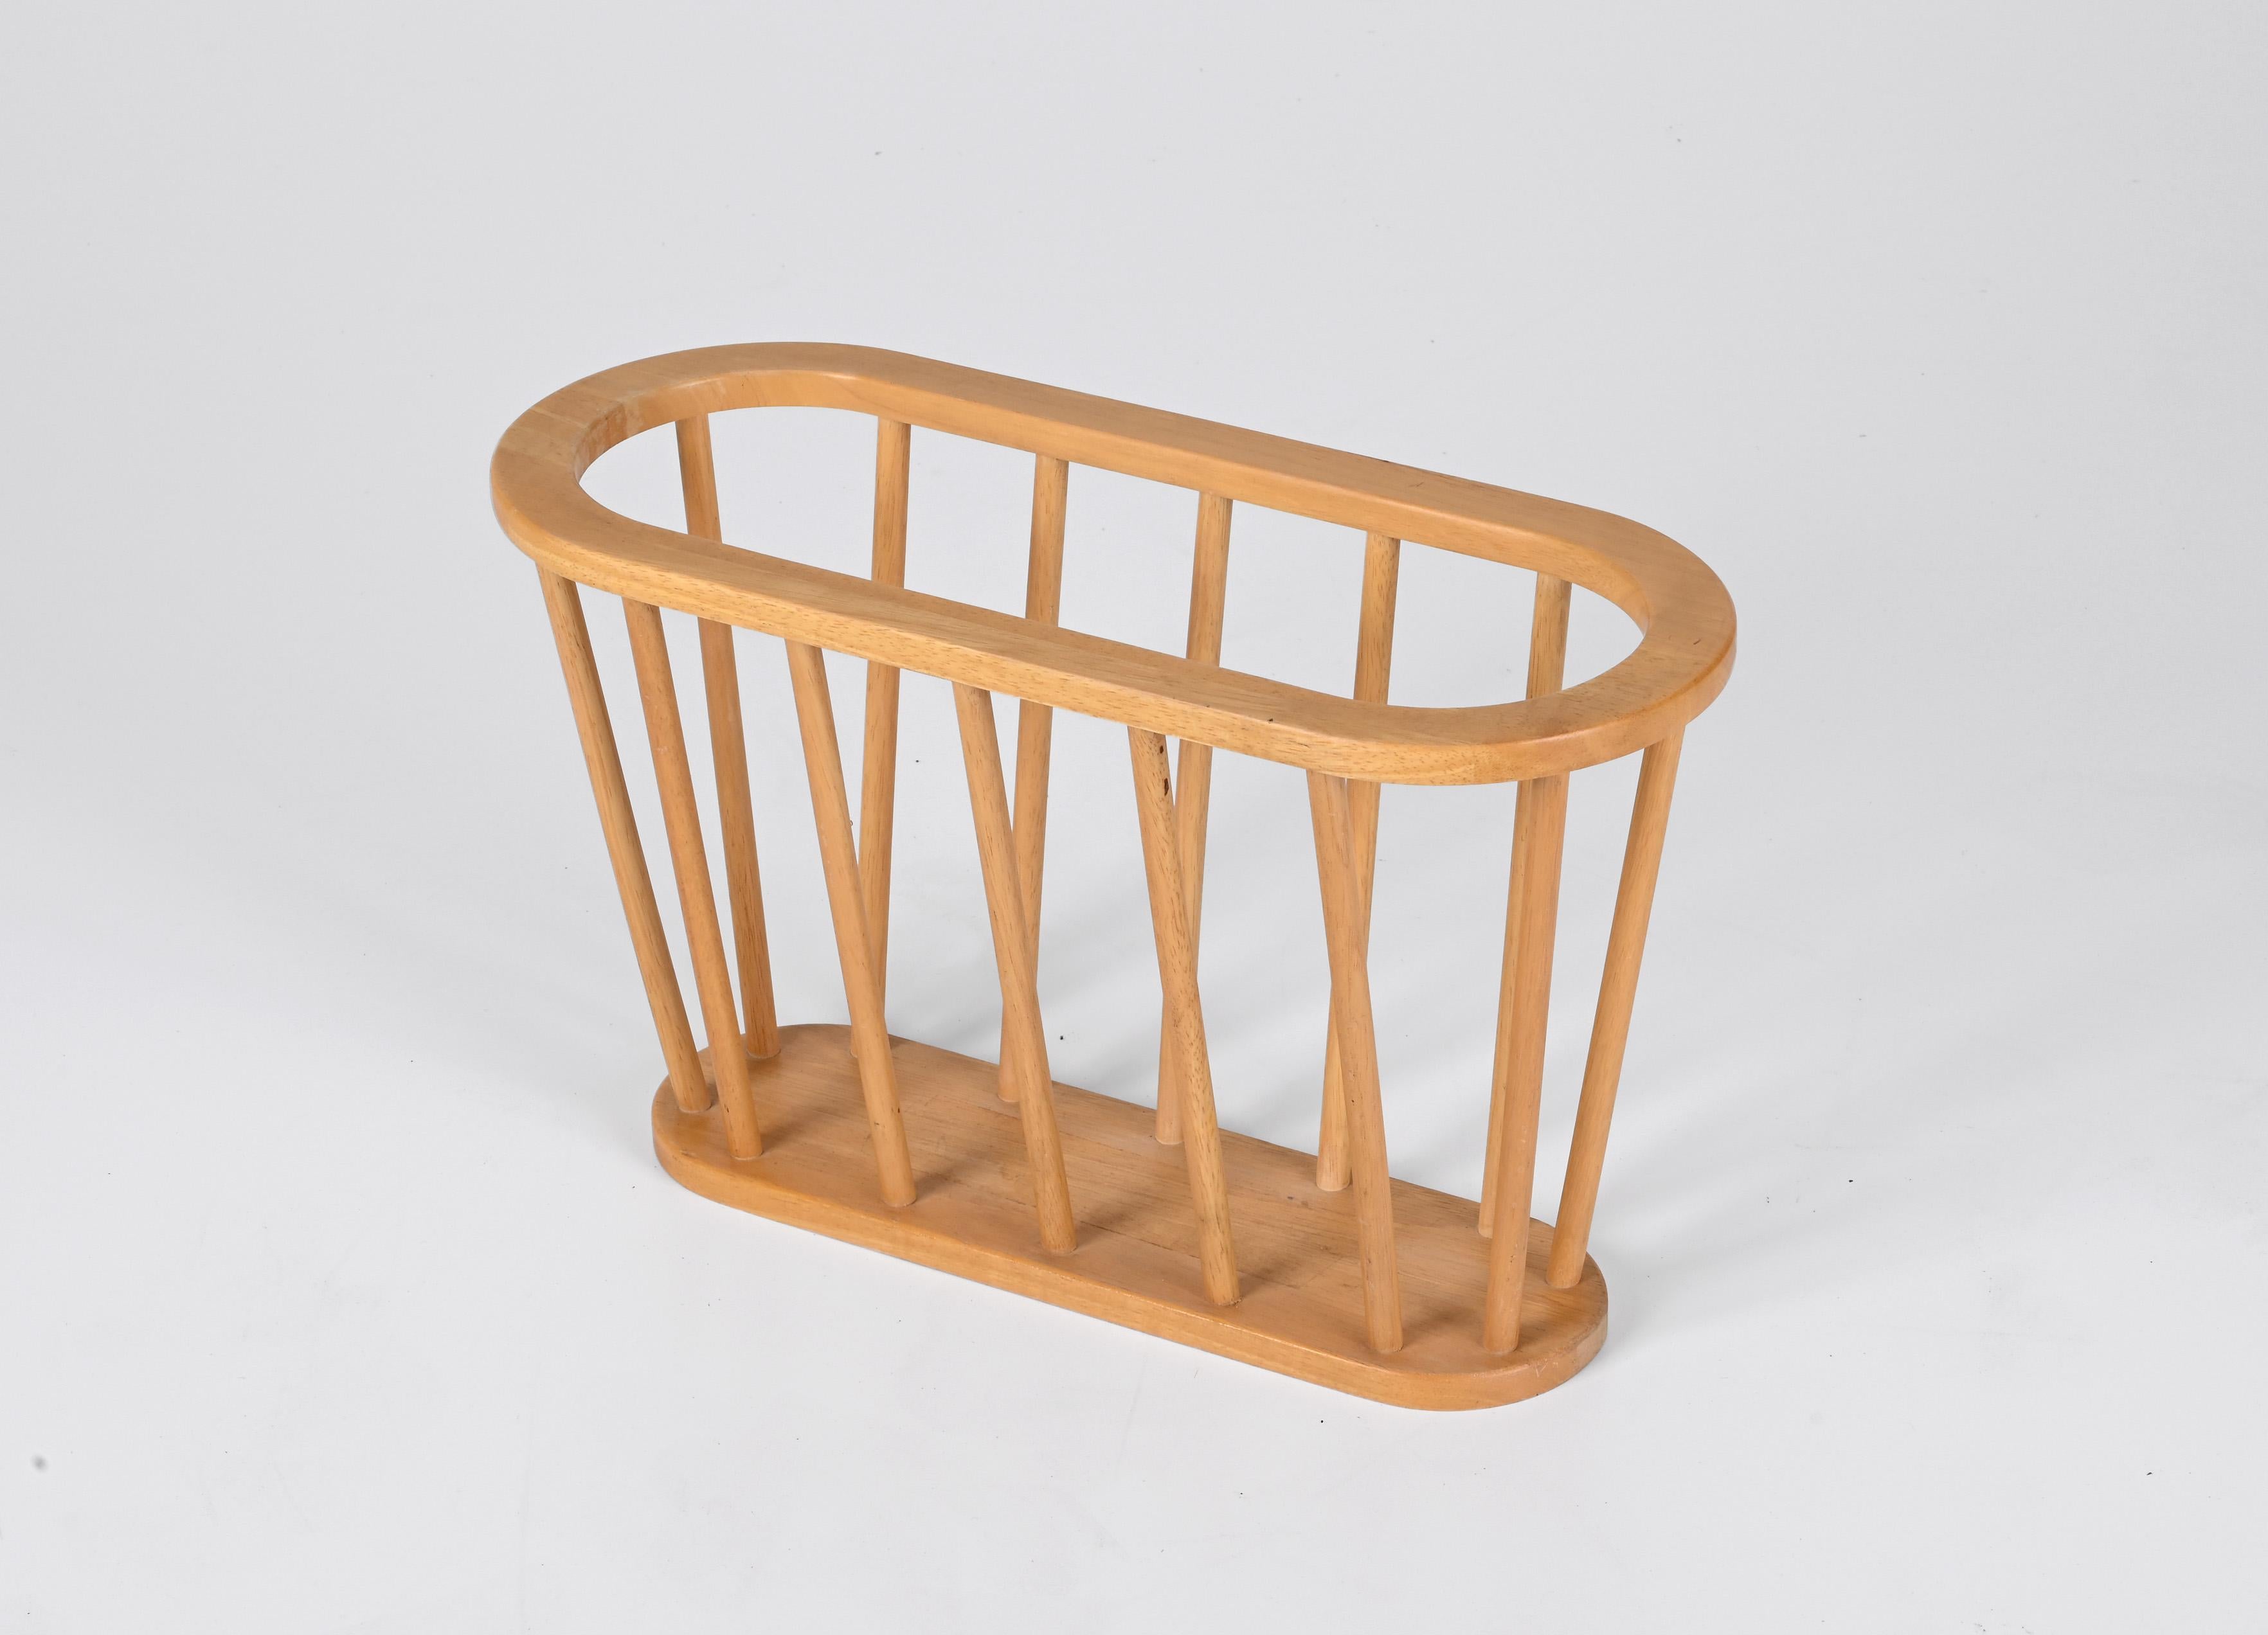 Amazing Mid-Century Modern oak wood magazine rack. This fantastic item was produced in Denmark during the 1970s.

A wonderful piece that is lovable because of its solid oak frame and because its shape and lines are in pure Scandinavian